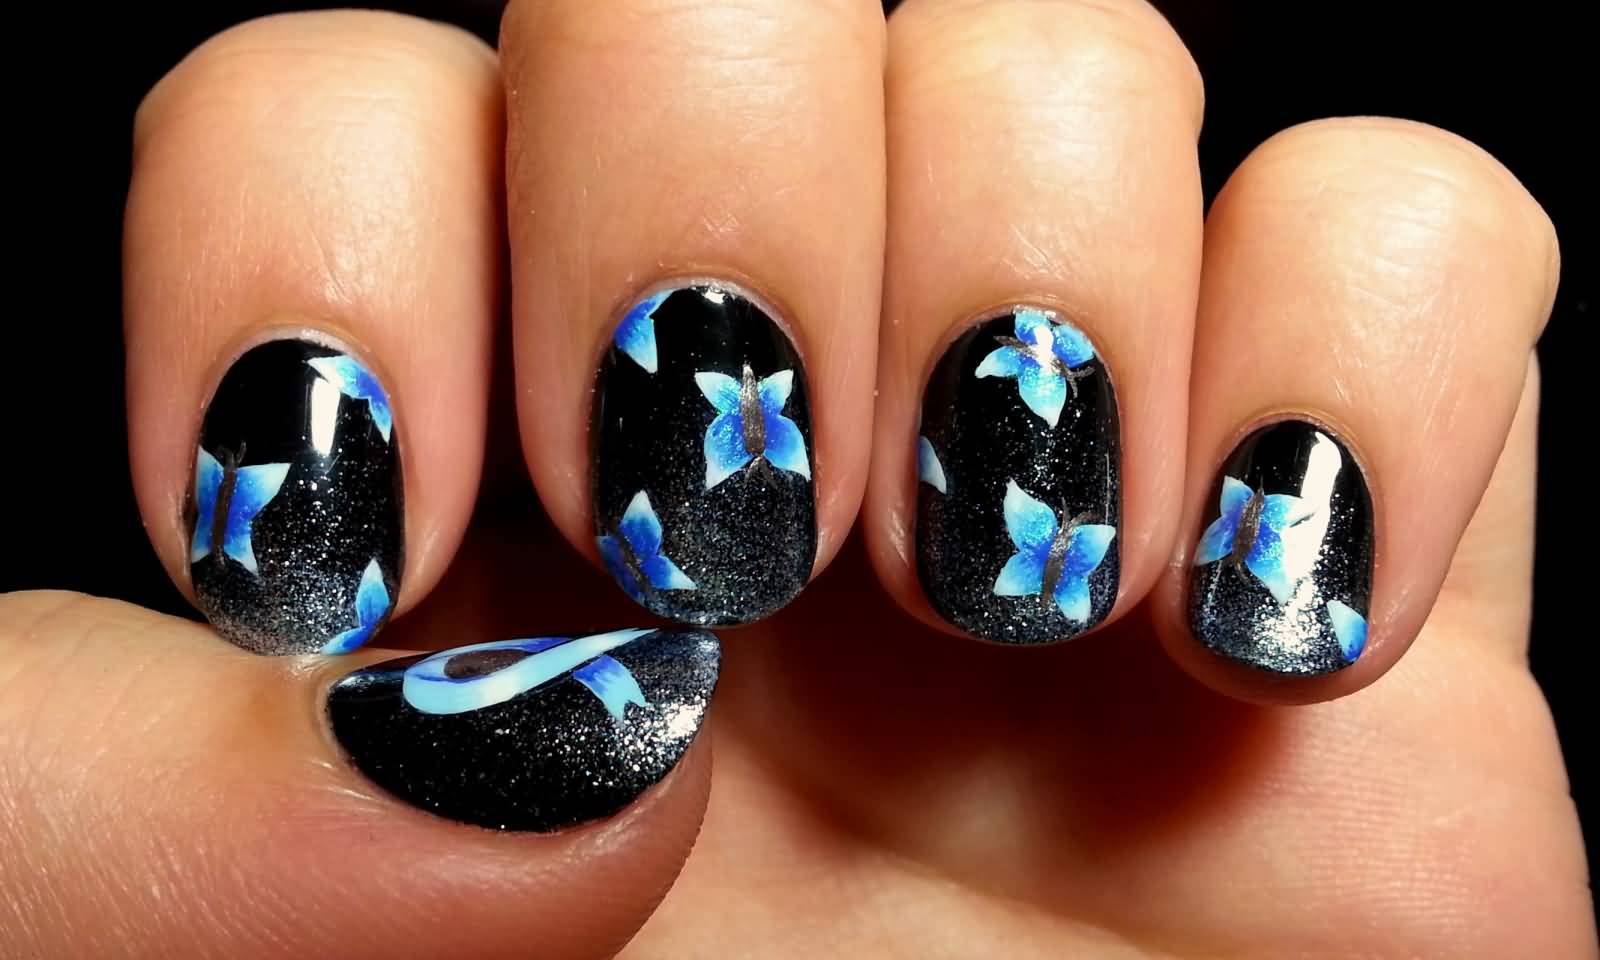 Black Nails With Blue Butterflies Nail Art